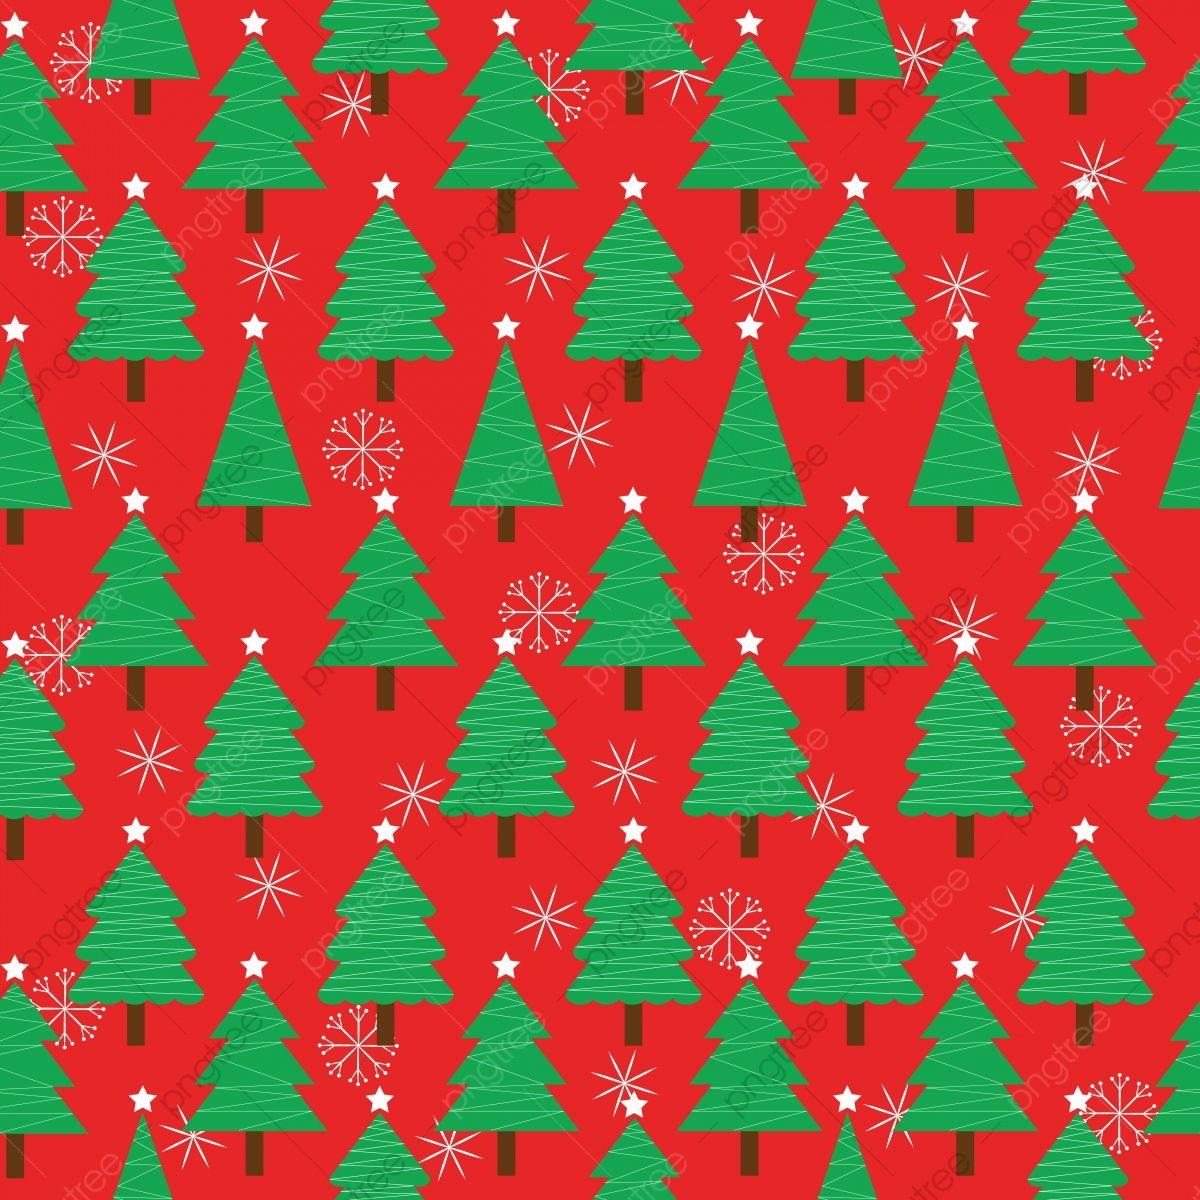 Red and Green Christmas Wallpapers - Top Free Red and Green Christmas ...